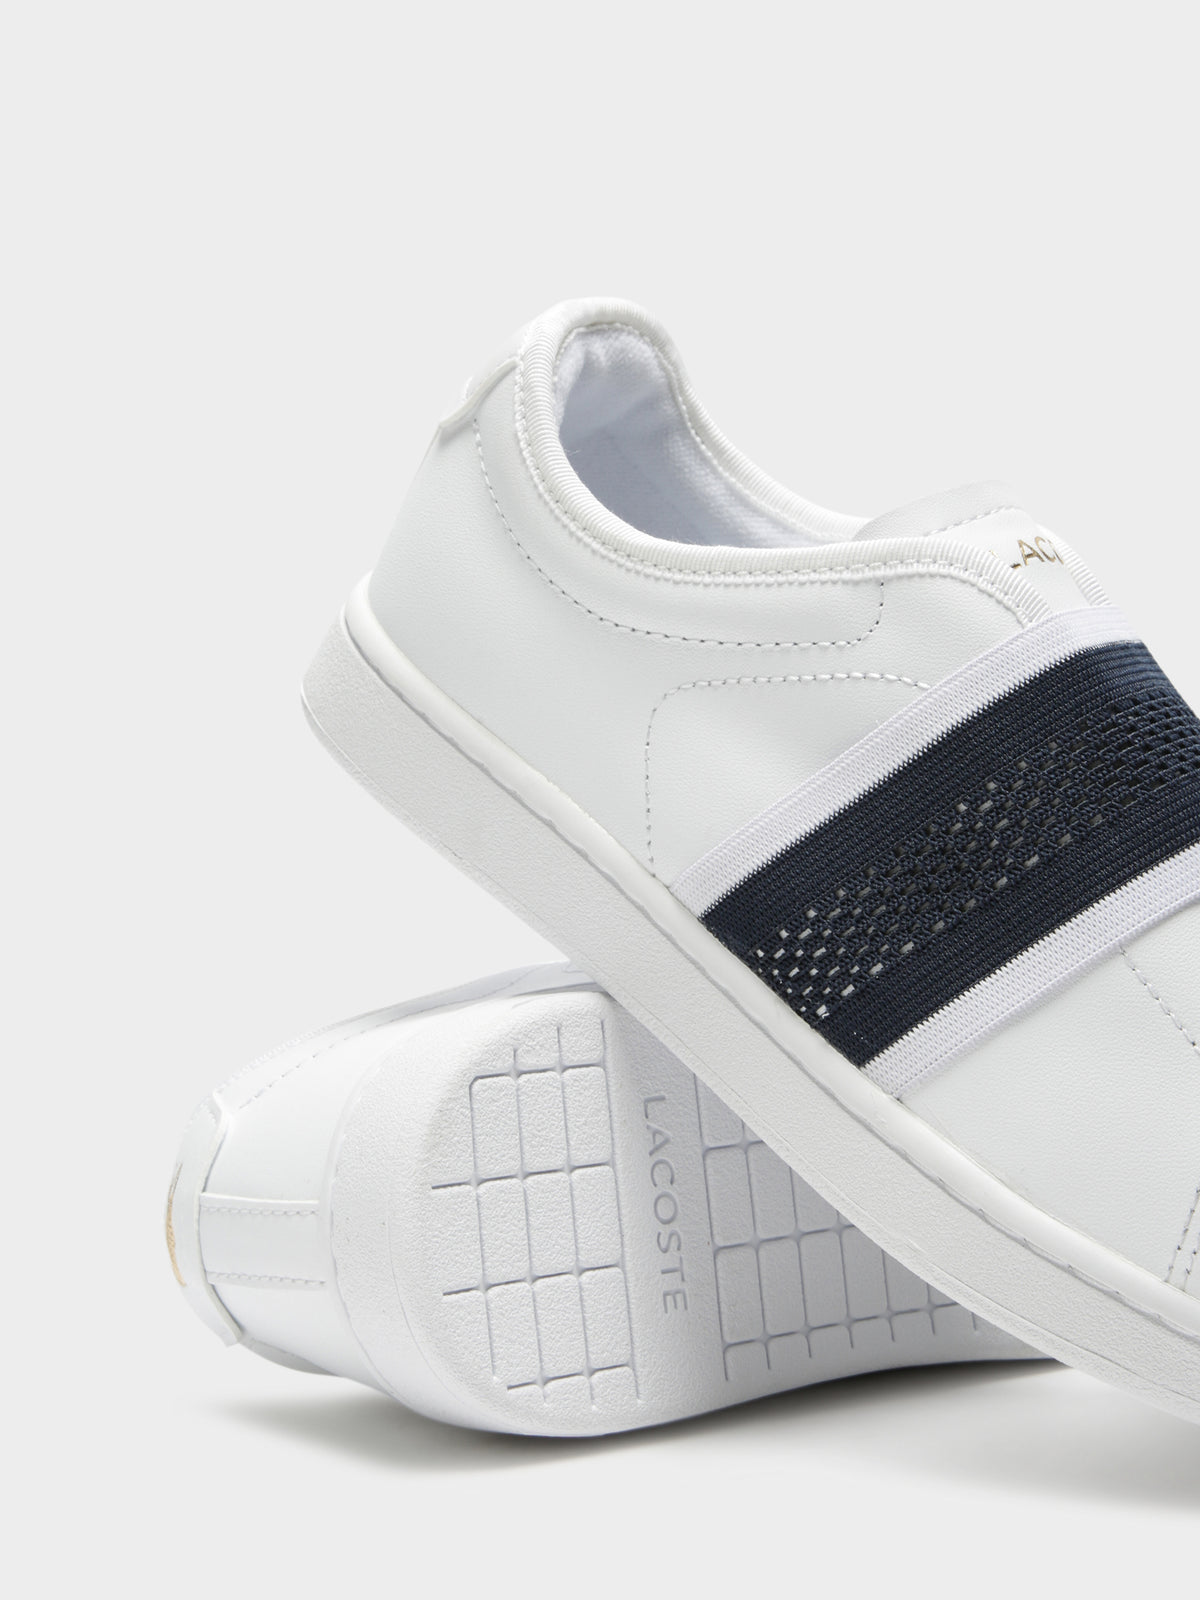 Womens Carnaby Evo Slip 119 Sneakers in White and Navy